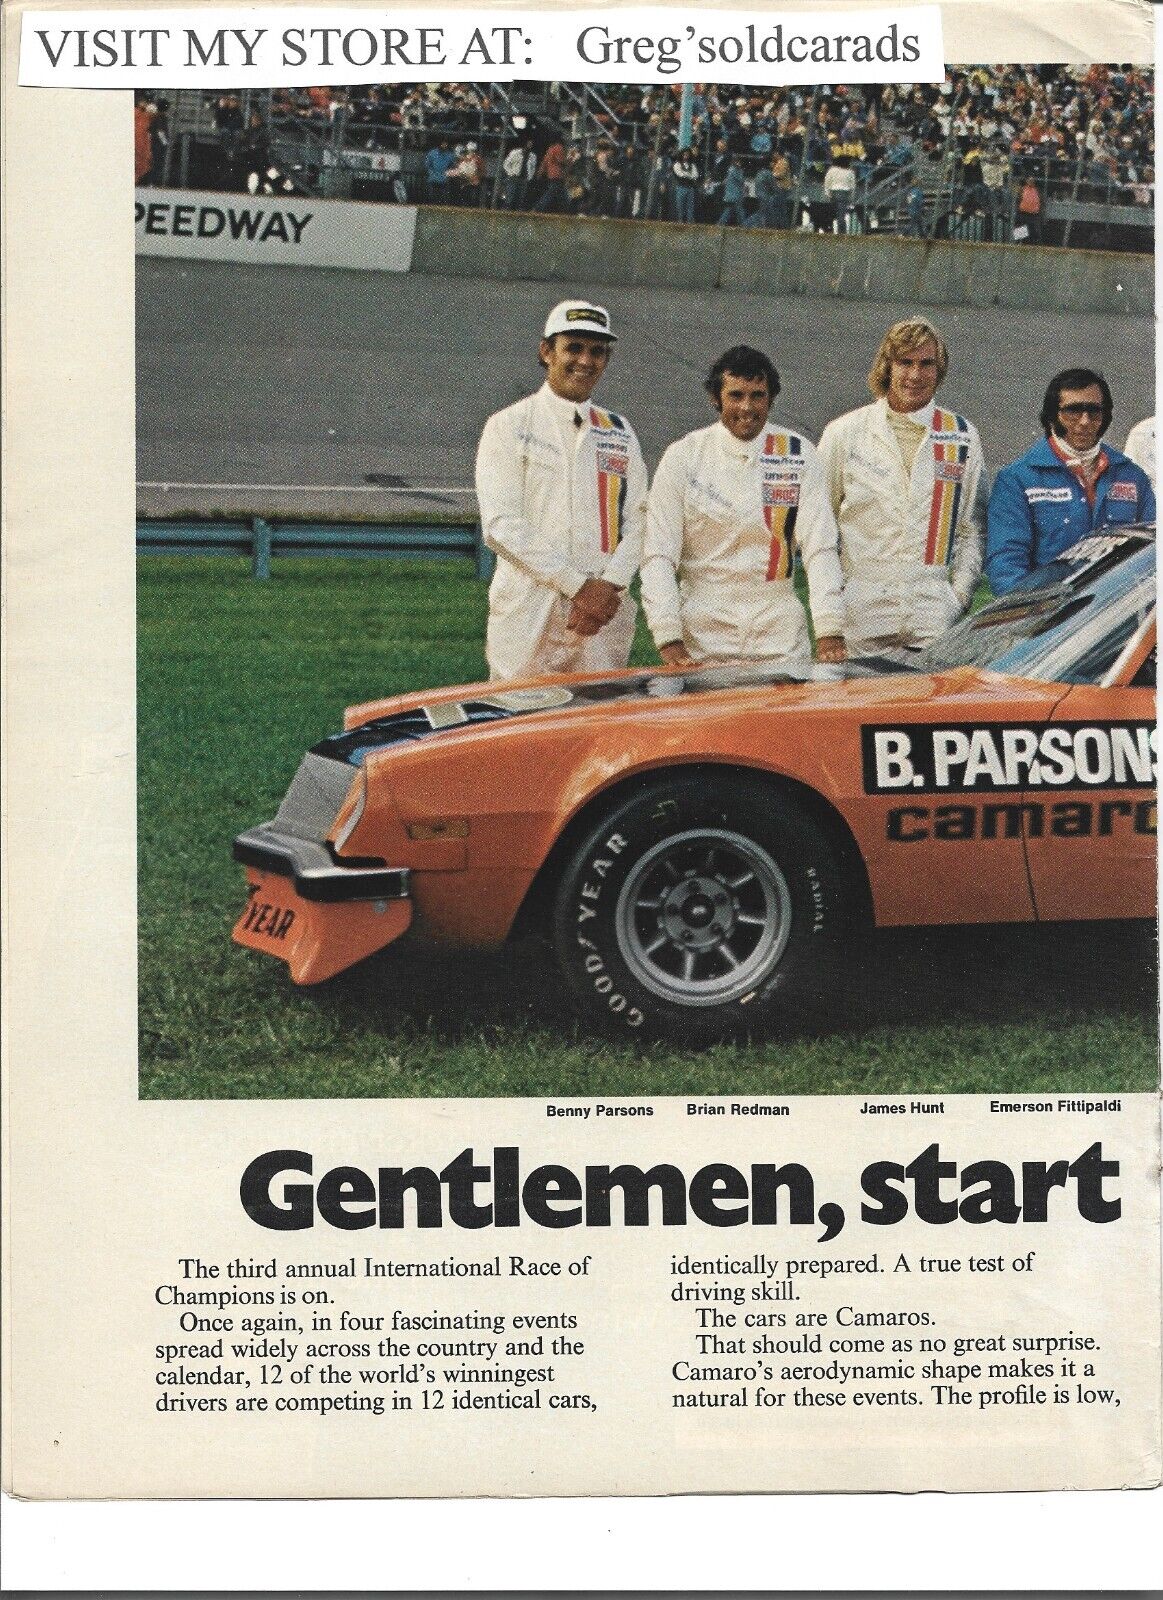 1976 Chevrolet Camaro print ad featuring the IROC racing car and their drivers